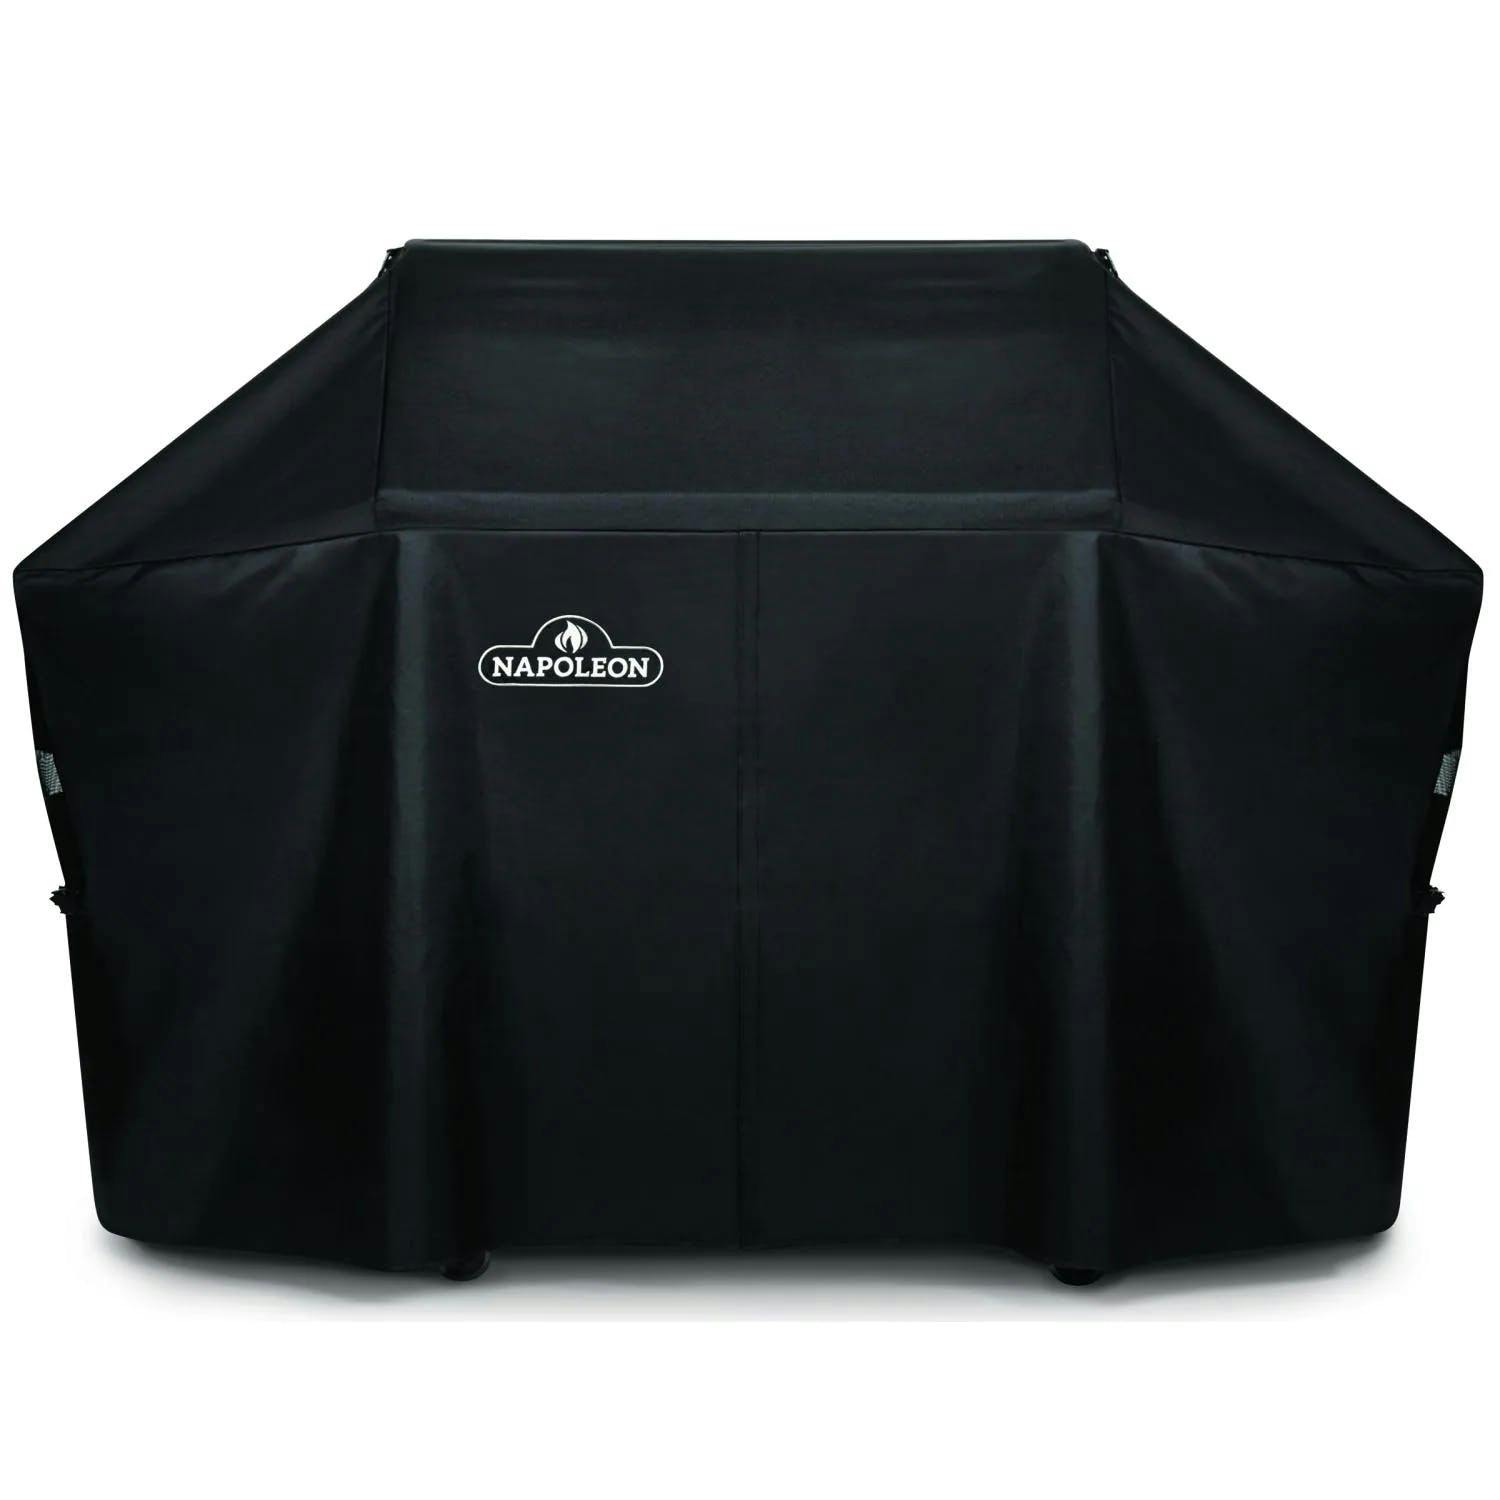 Napoleon Grill Cover For Pro Grills